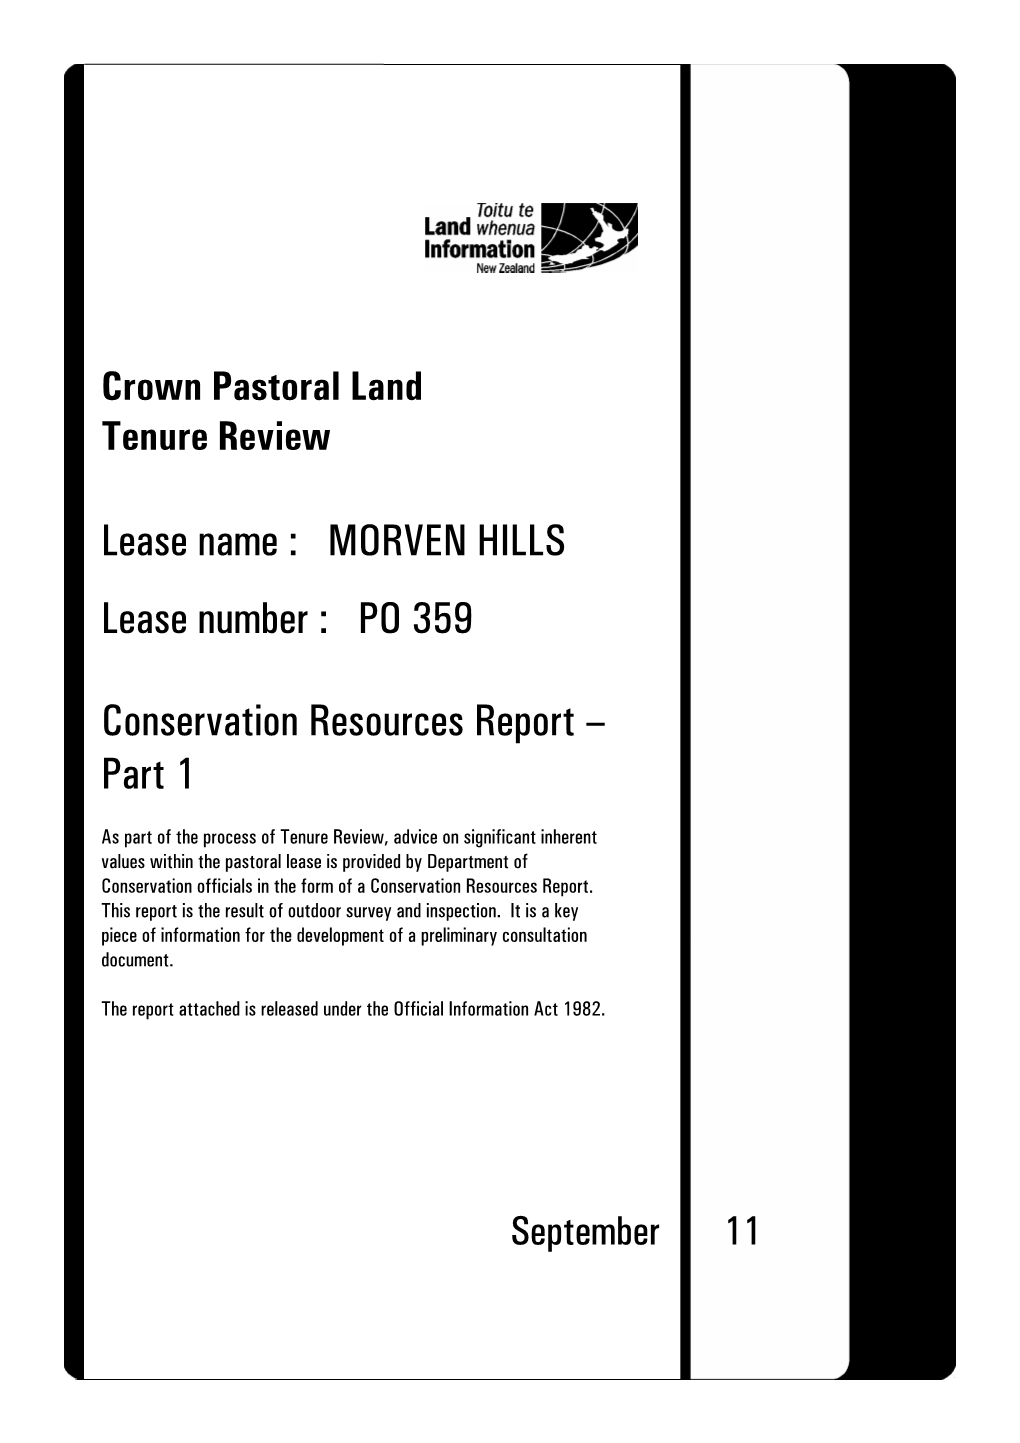 Morven Hills Tenure Review 2004 (Clutha Flathead Galaxias Card Numbers 25552 and 25559)